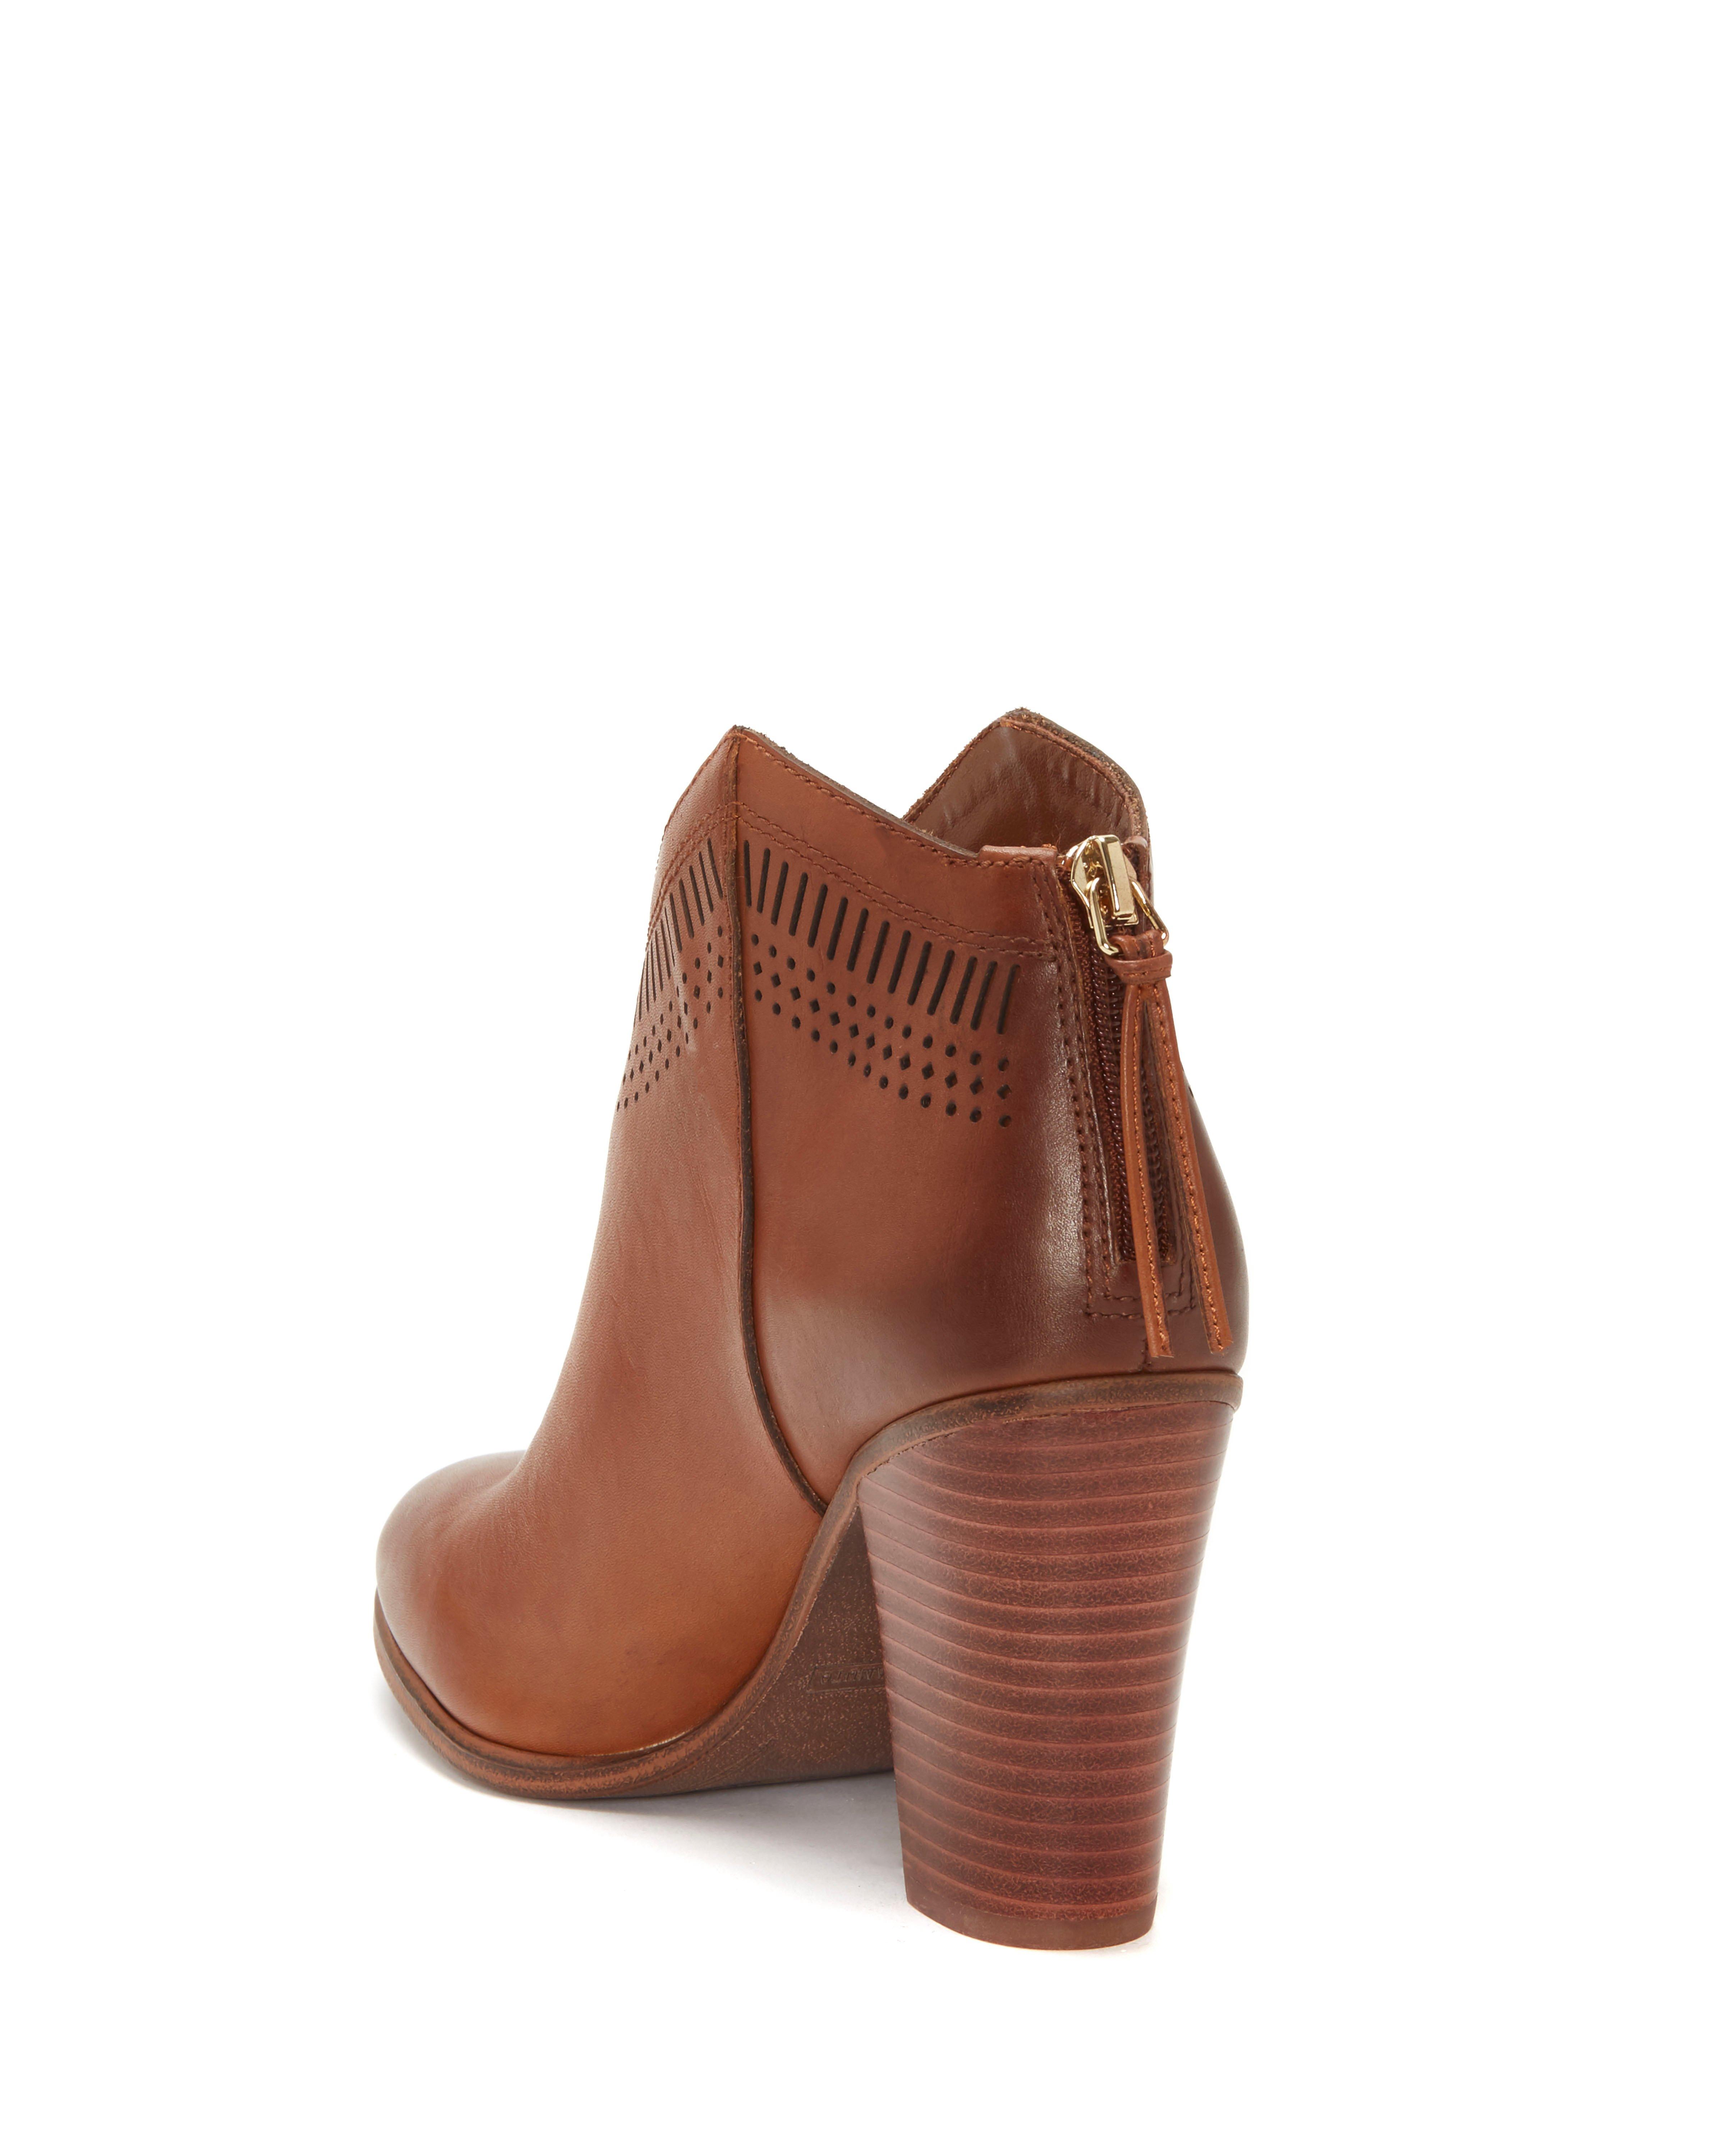 vince camuto fetter booties